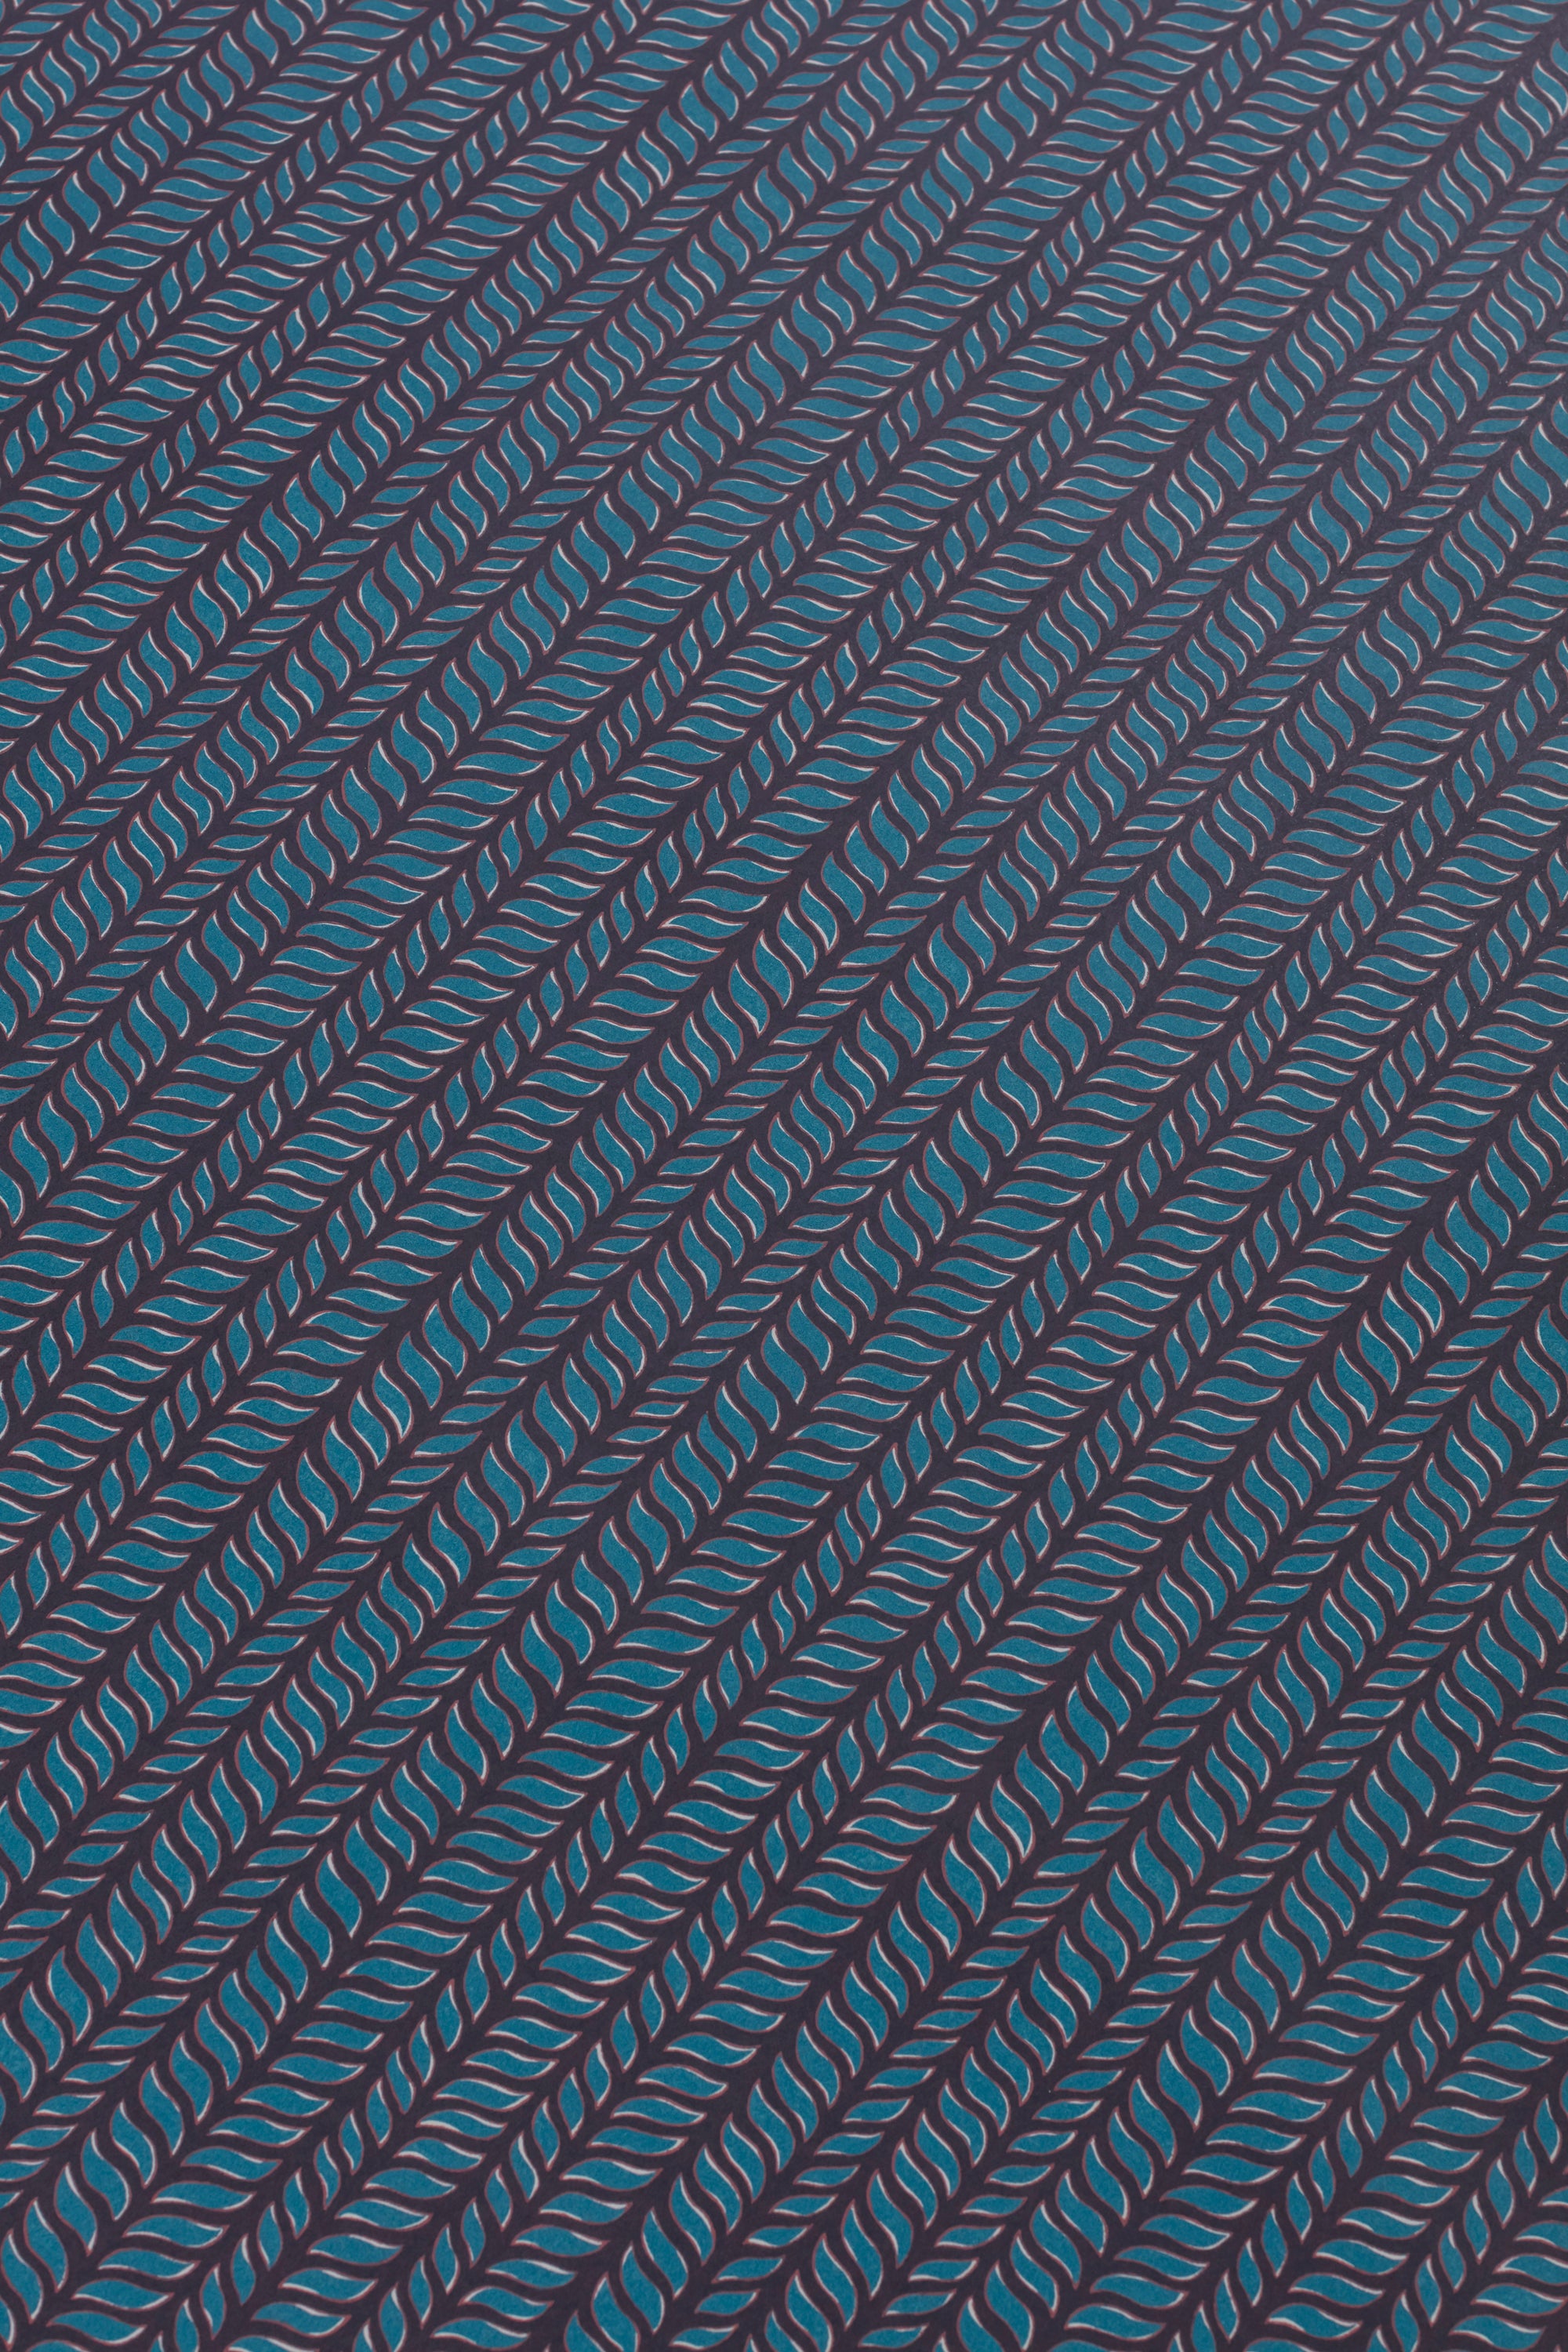 Detail of a wallpaper panel in a painterly herringbone print in turquoise and pink on a navy field.